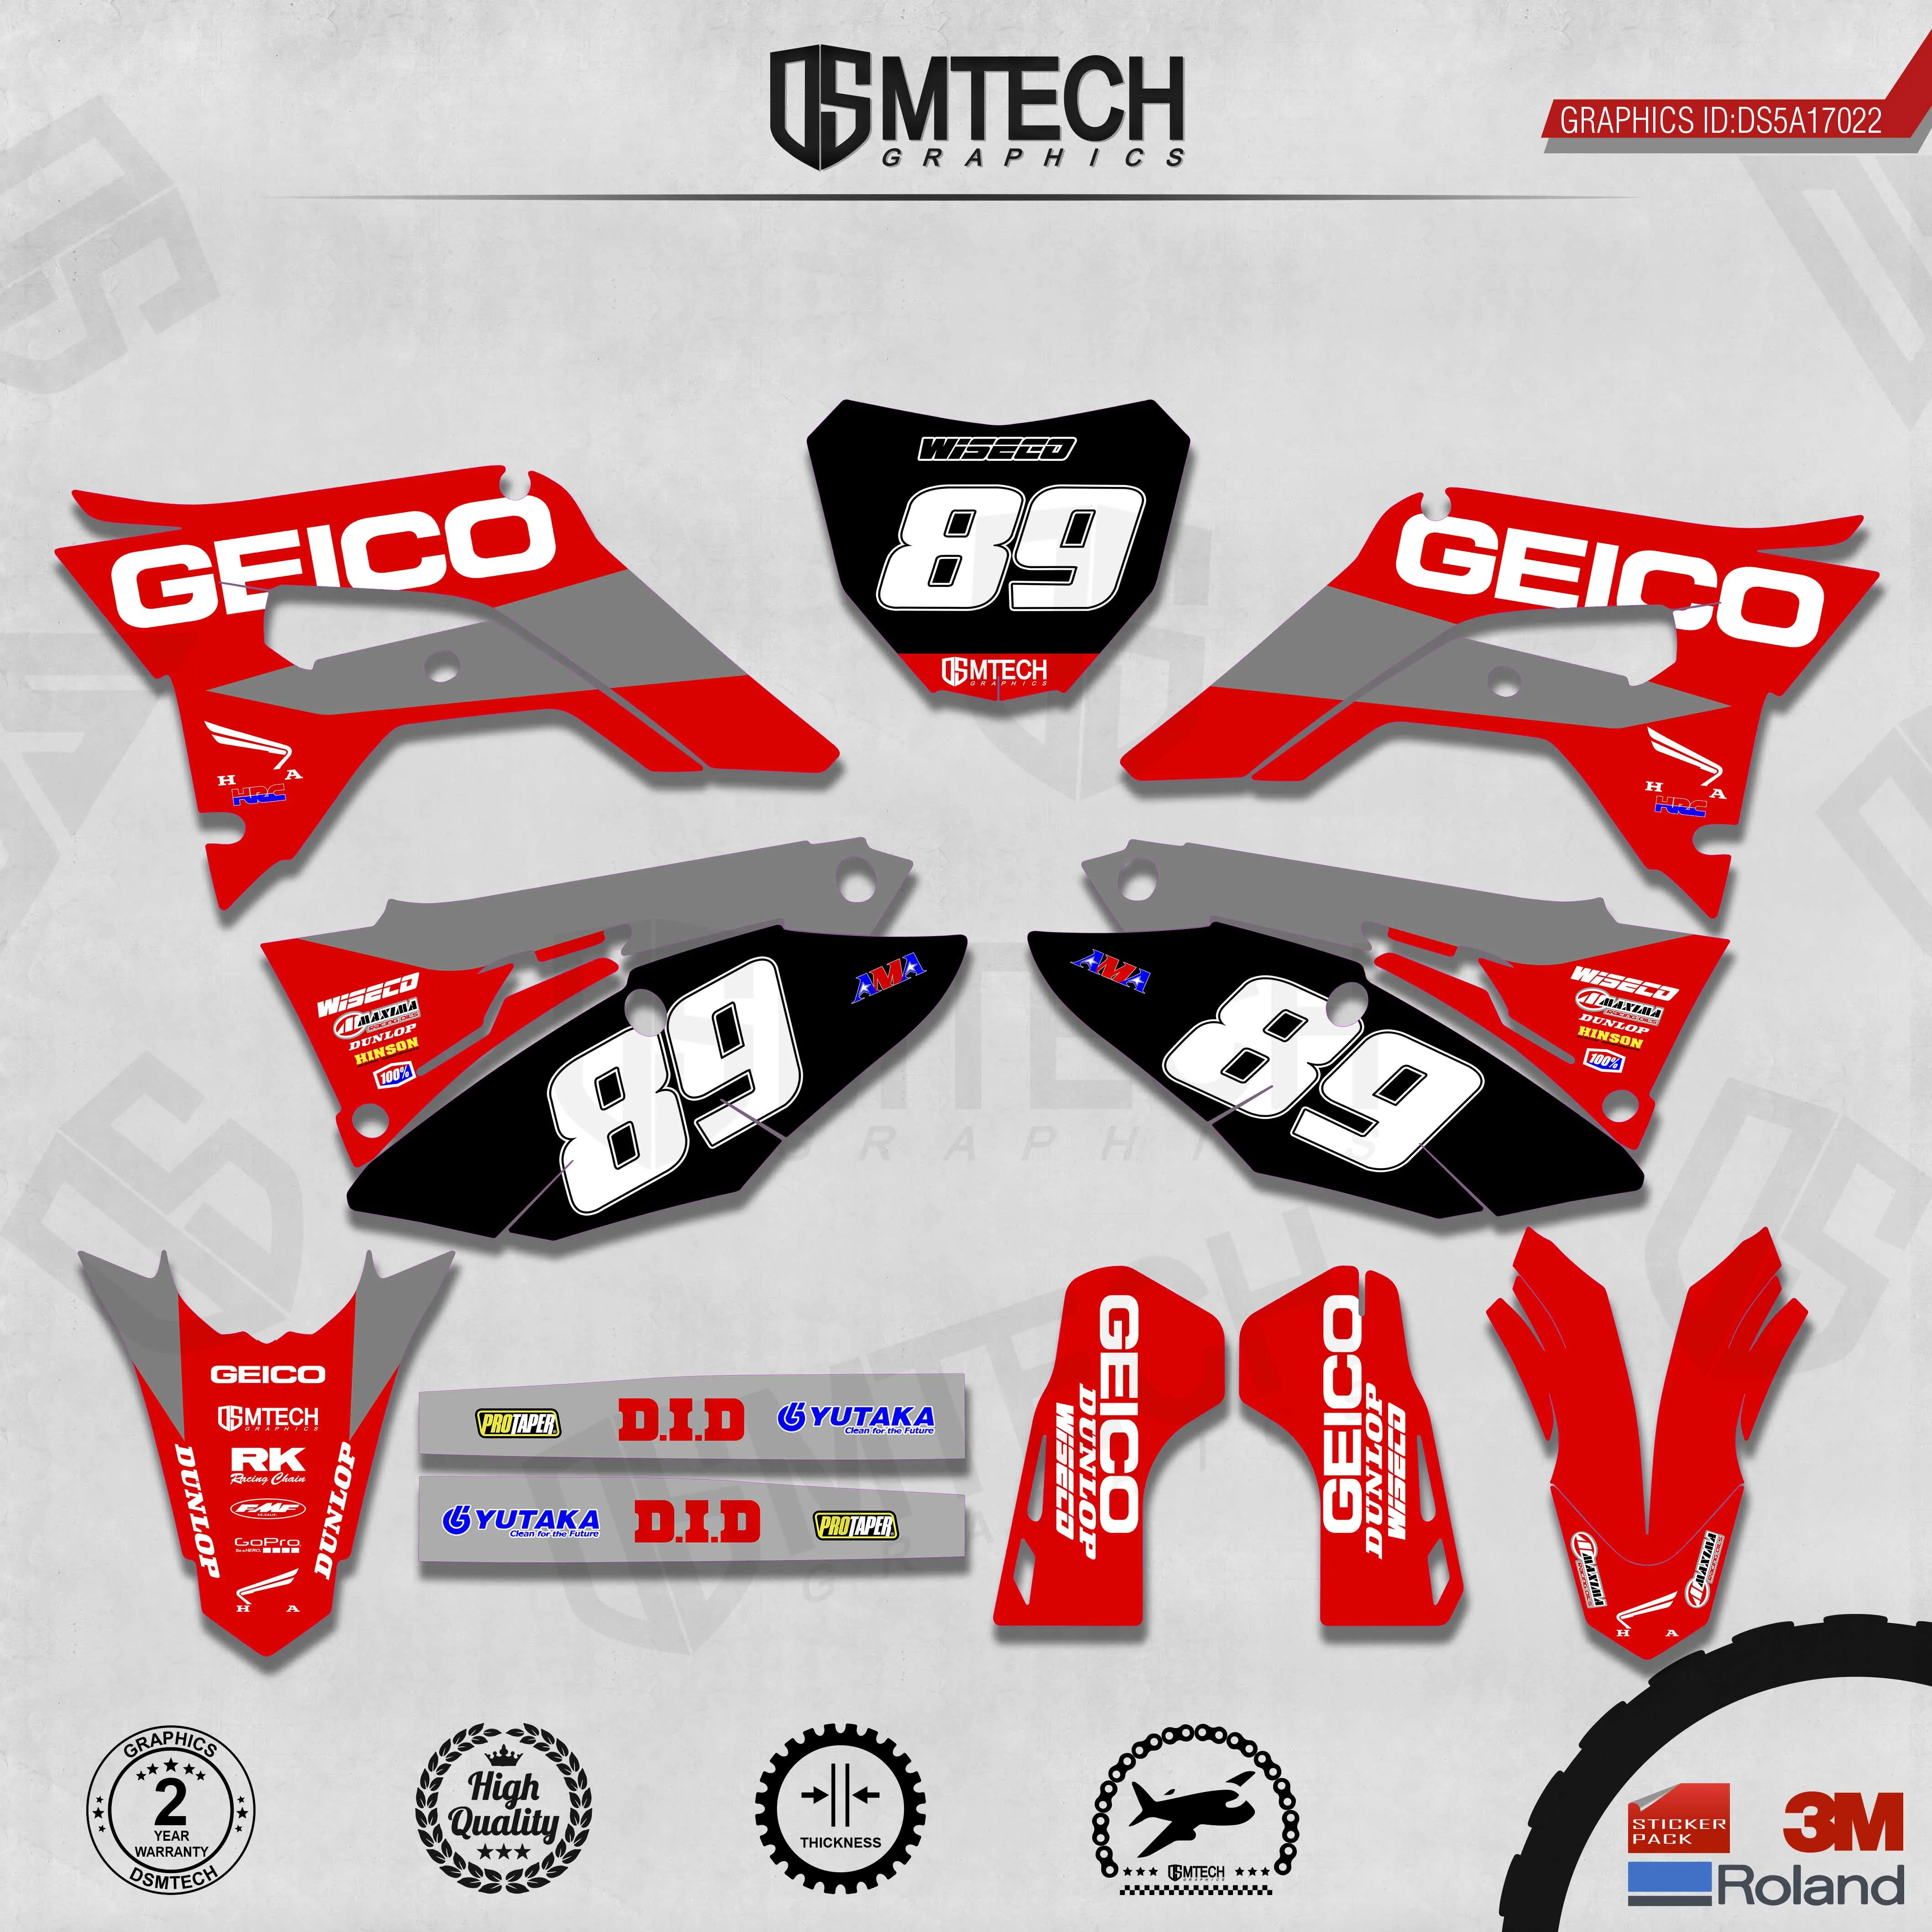 DSMTECH Customized Team Graphics Backgrounds Decals 3M Custom Stickers For 2018-2020 CRF250R 2017 2018 2019-2020 CRF450R 022